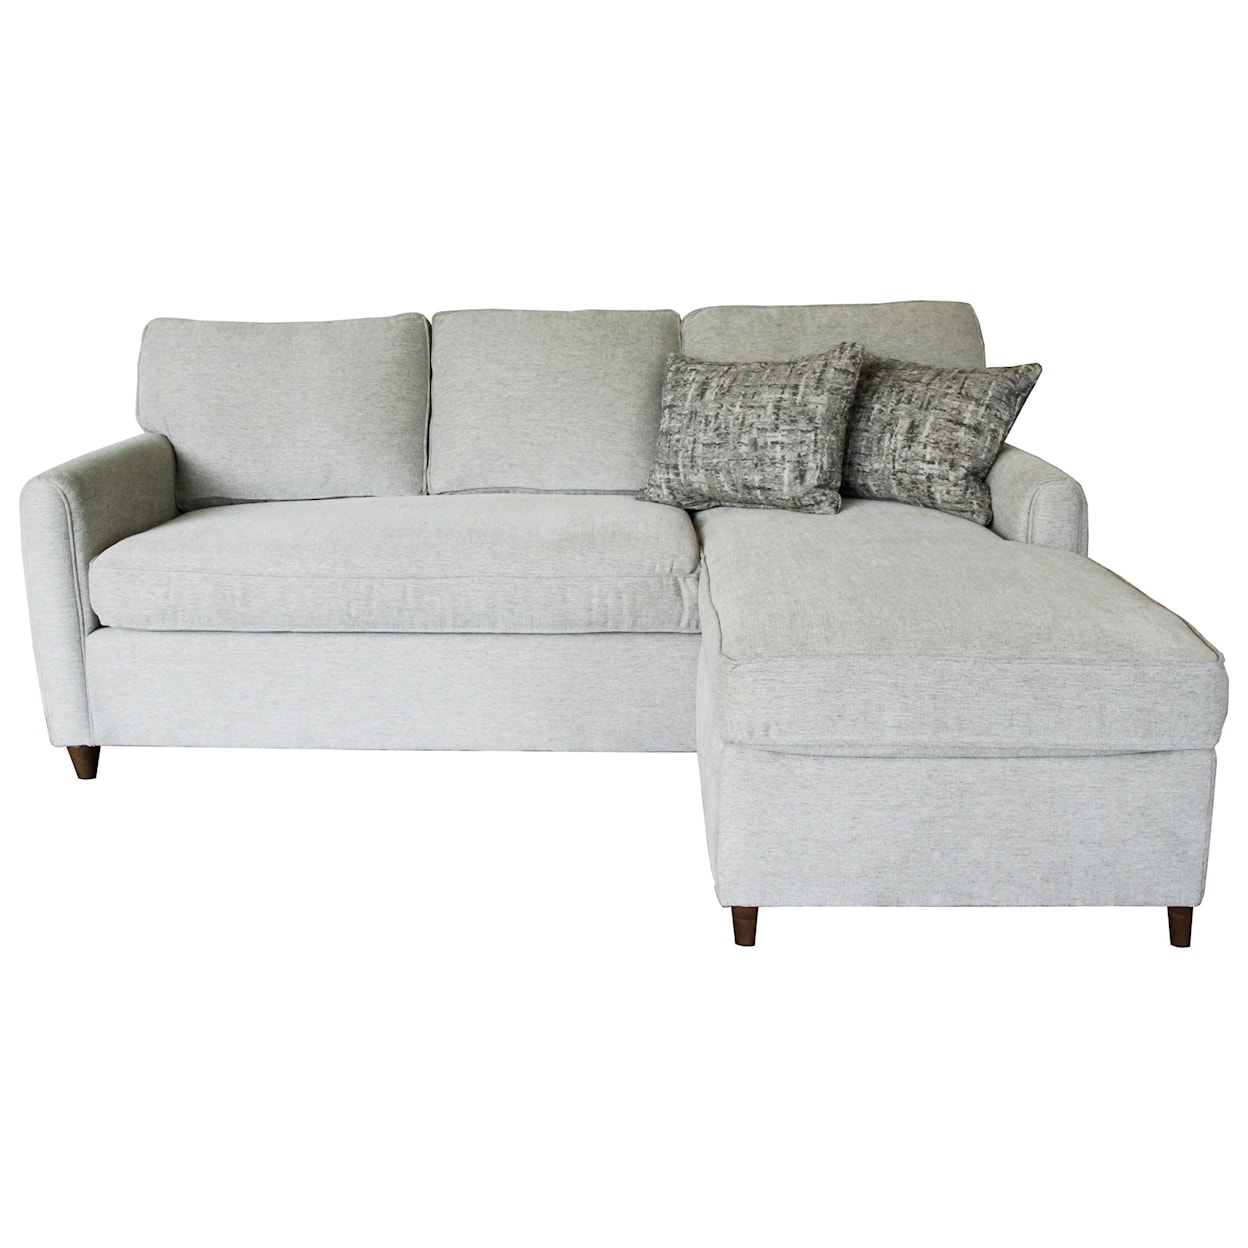 Jonathan Louis Emory Queen Sleeper Sofa with Chaise